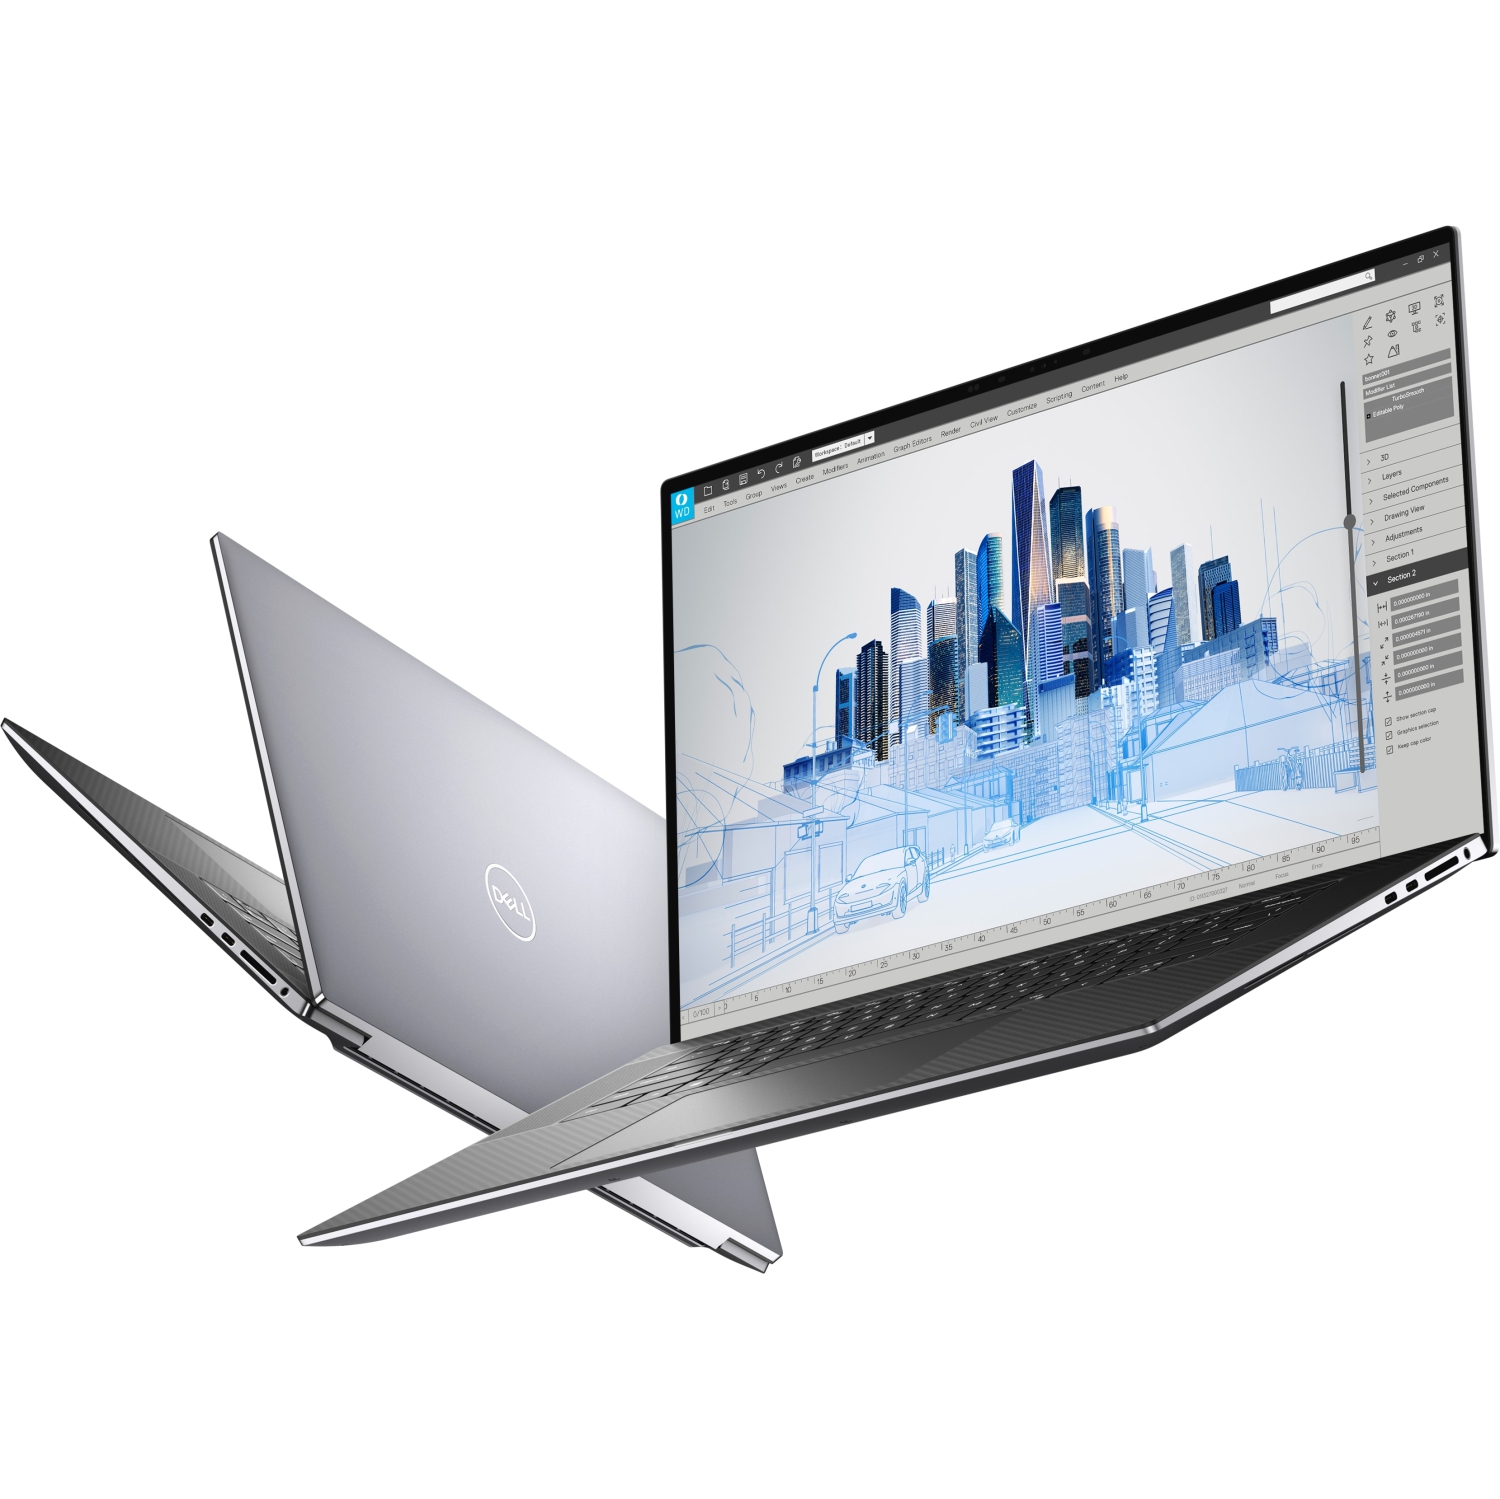 Refurbished (Excellent) - Dell Precision 5000 5760 Workstation Laptop (2021), 17" FHD+, Core Xeon W, 2TB SSD, 32GB RAM, RTX A3000, 5 GHz, 11th Gen CPU Certified